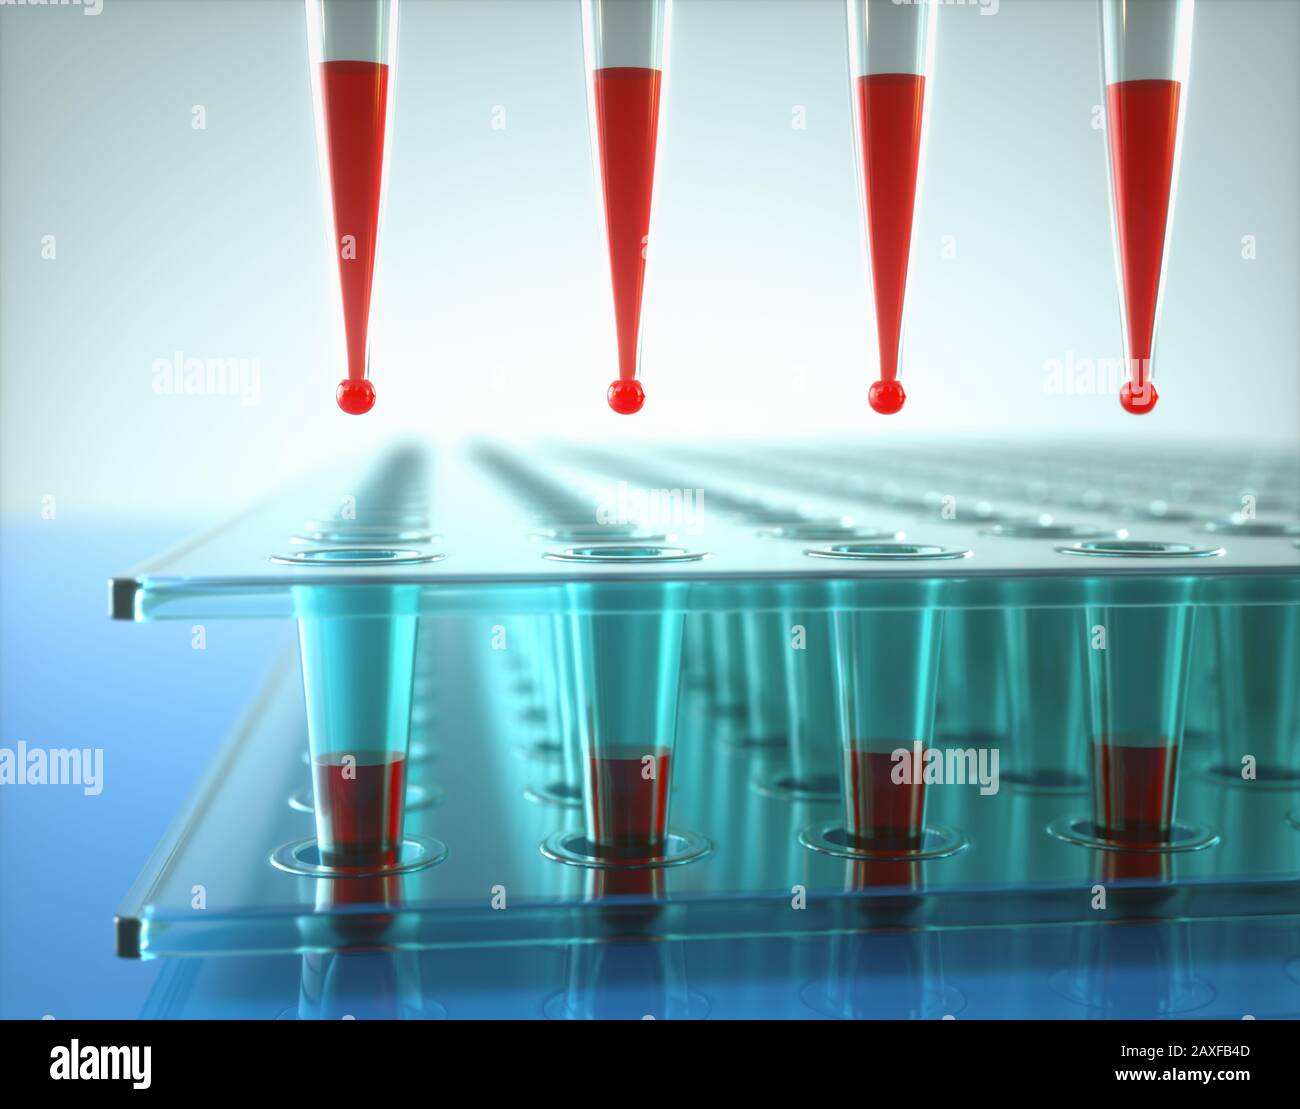 Multichannel pipette and multi well plates used in microbiology lab. 3D illustration. Stock Photo